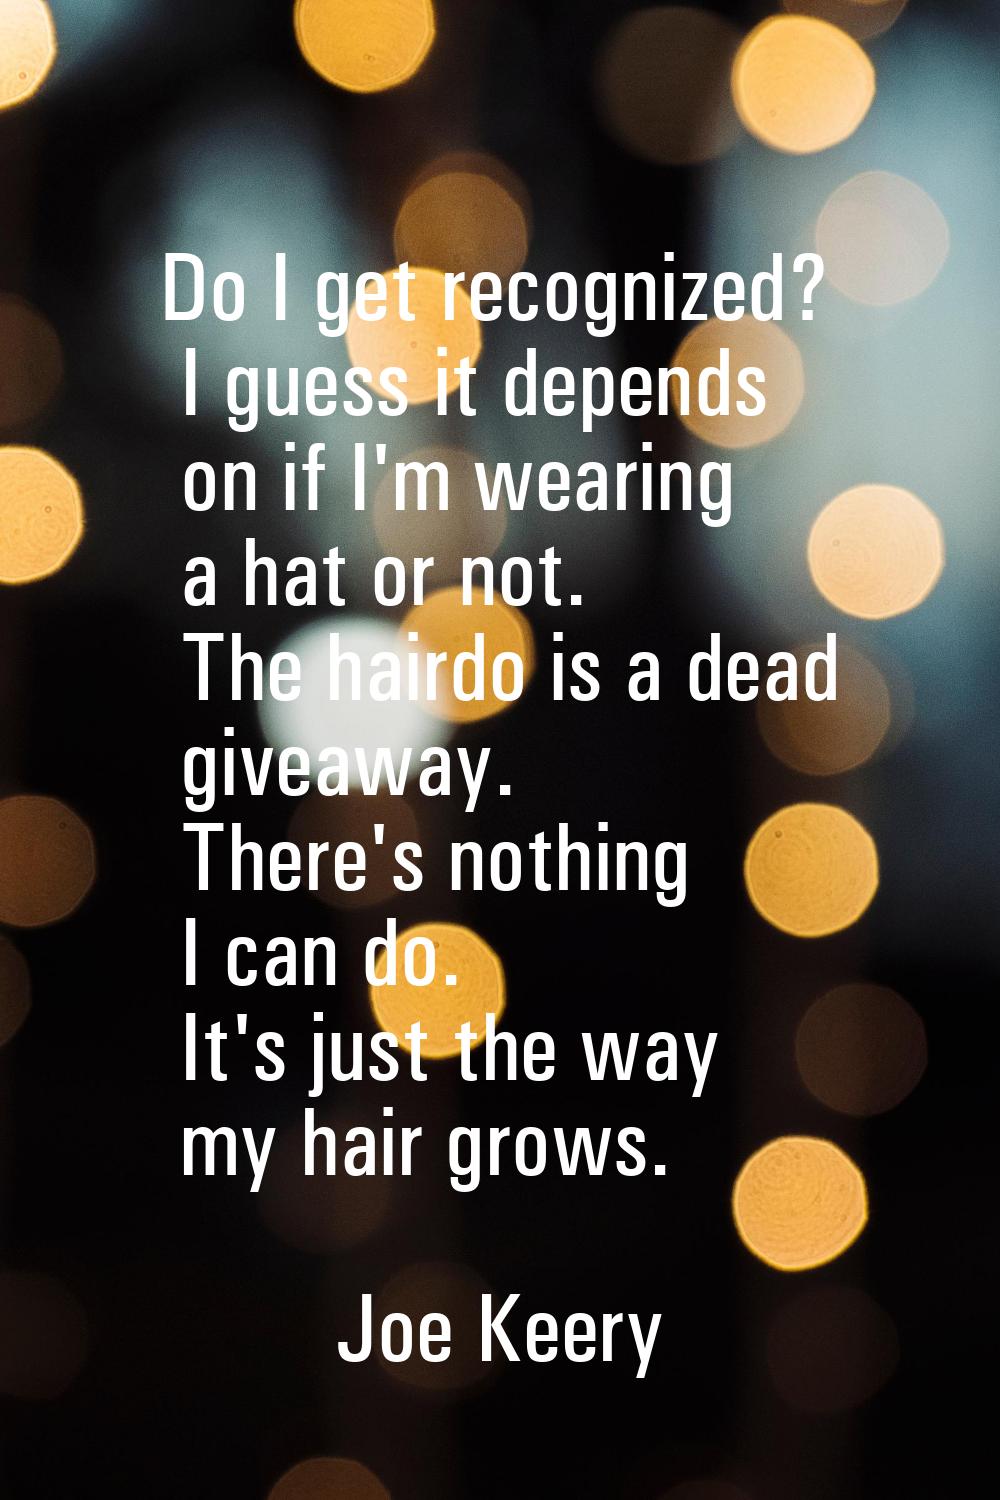 Do I get recognized? I guess it depends on if I'm wearing a hat or not. The hairdo is a dead giveaw